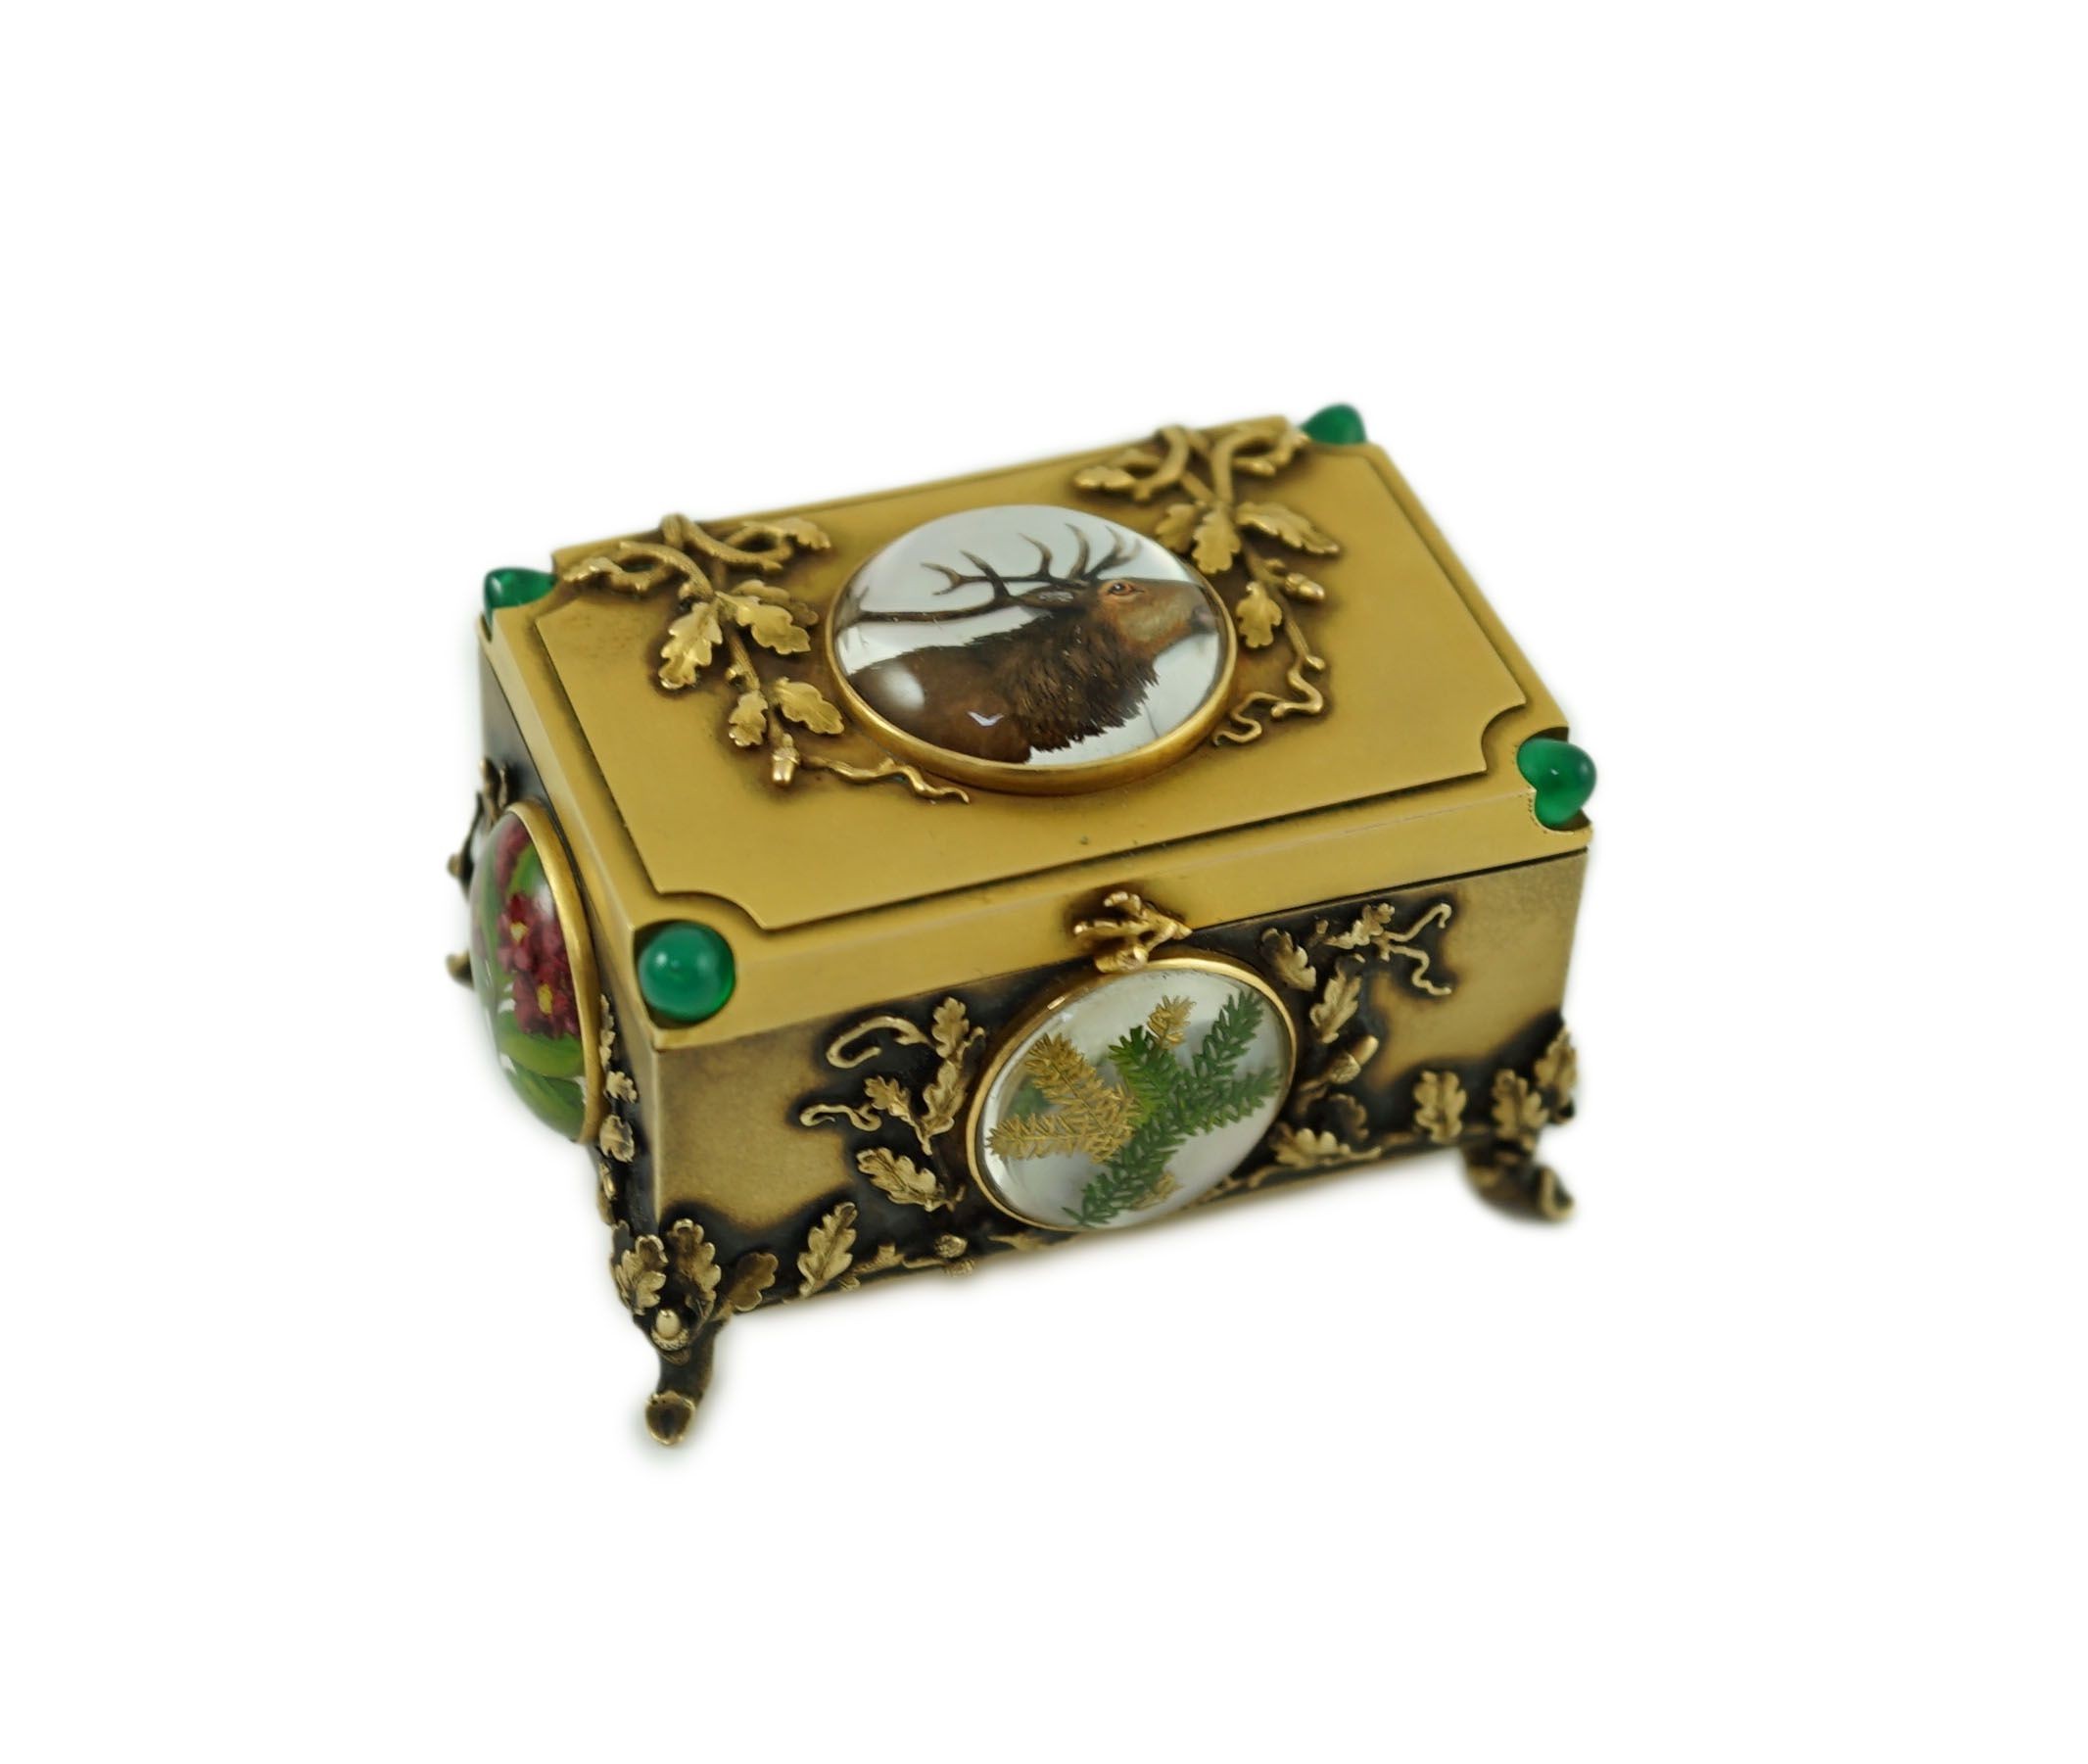 A late 19th/early 20th century Viennese gold, chrysoprase and Essex crystal set small trinket casket, by Josef Siess Sohne, (1895-1922)